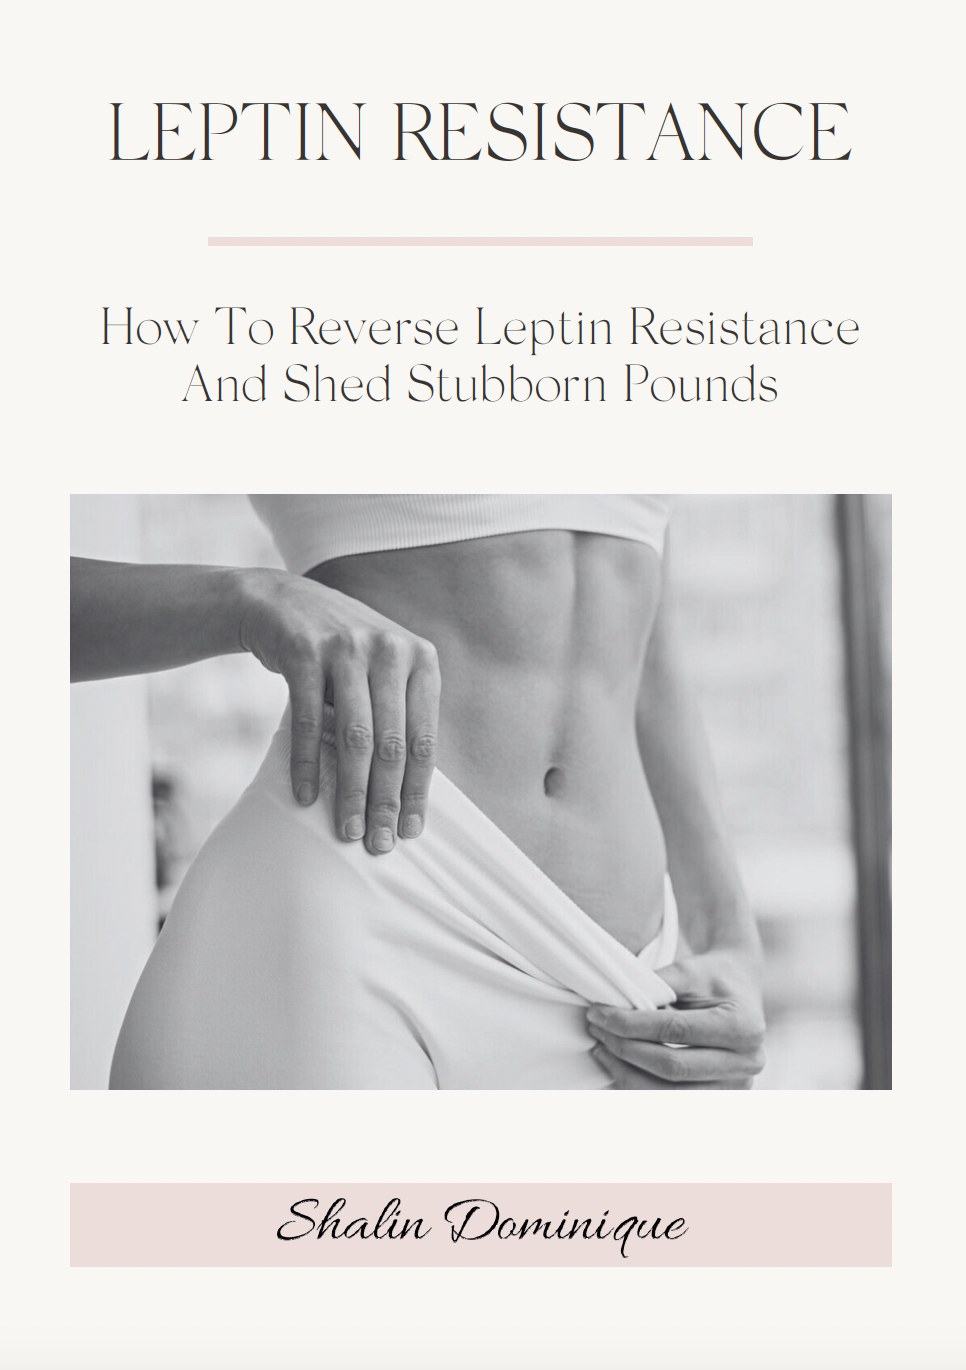 How To Reverse Leptin Resistance And Shed Stubborn Pounds PDF